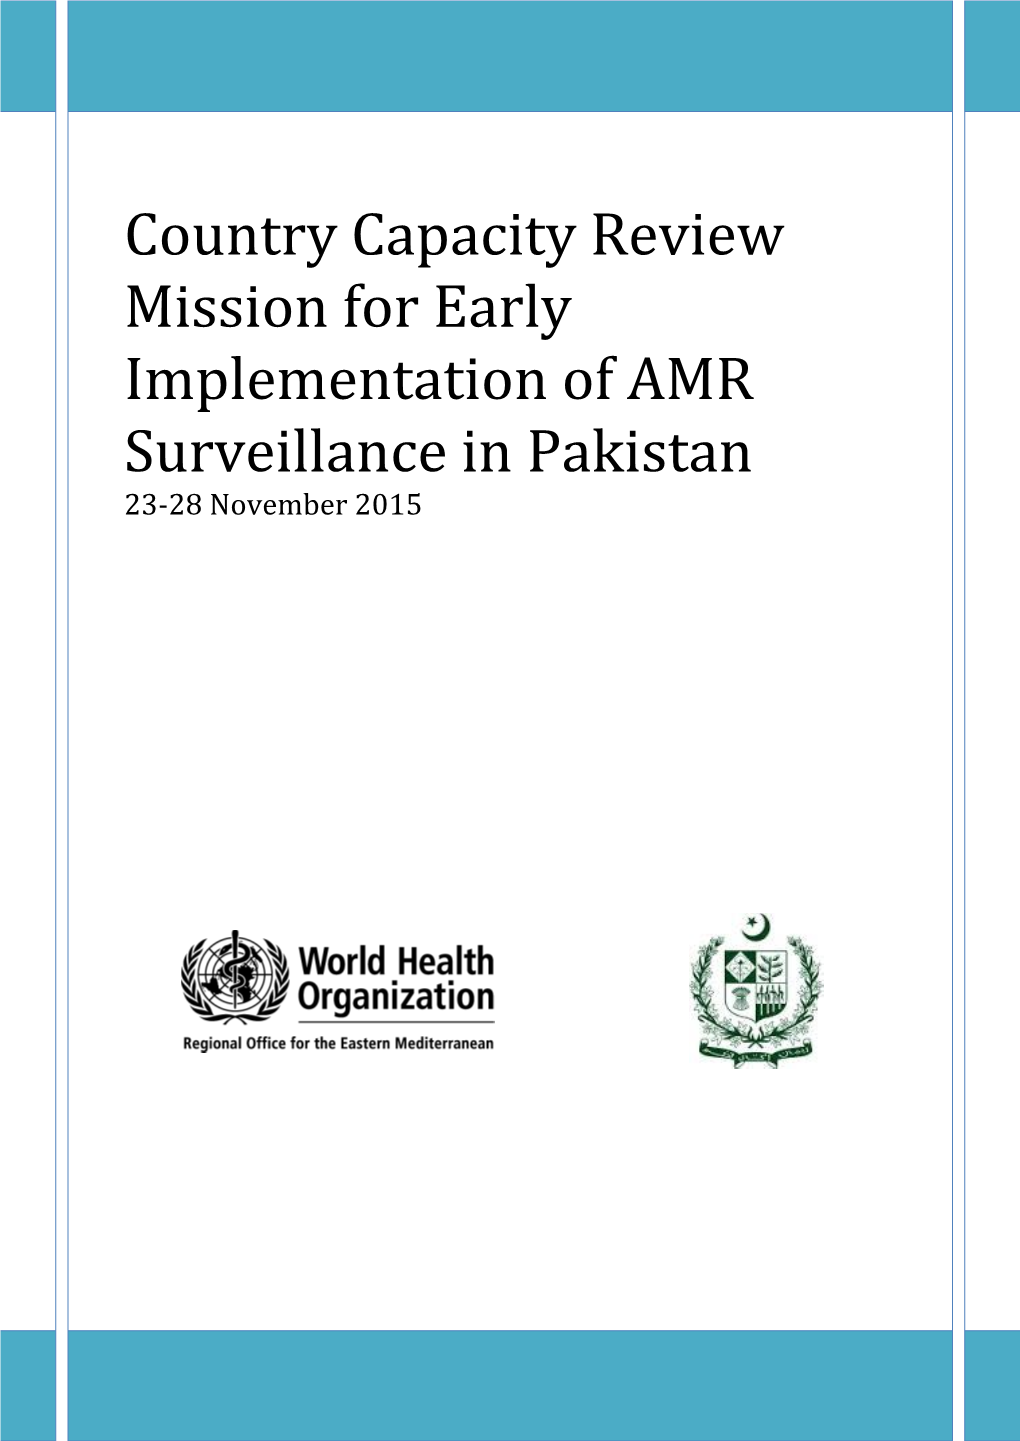 Country Capacity Review Mission for Early Implementation of AMR Surveillance in Pakistan 23-28 November 2015